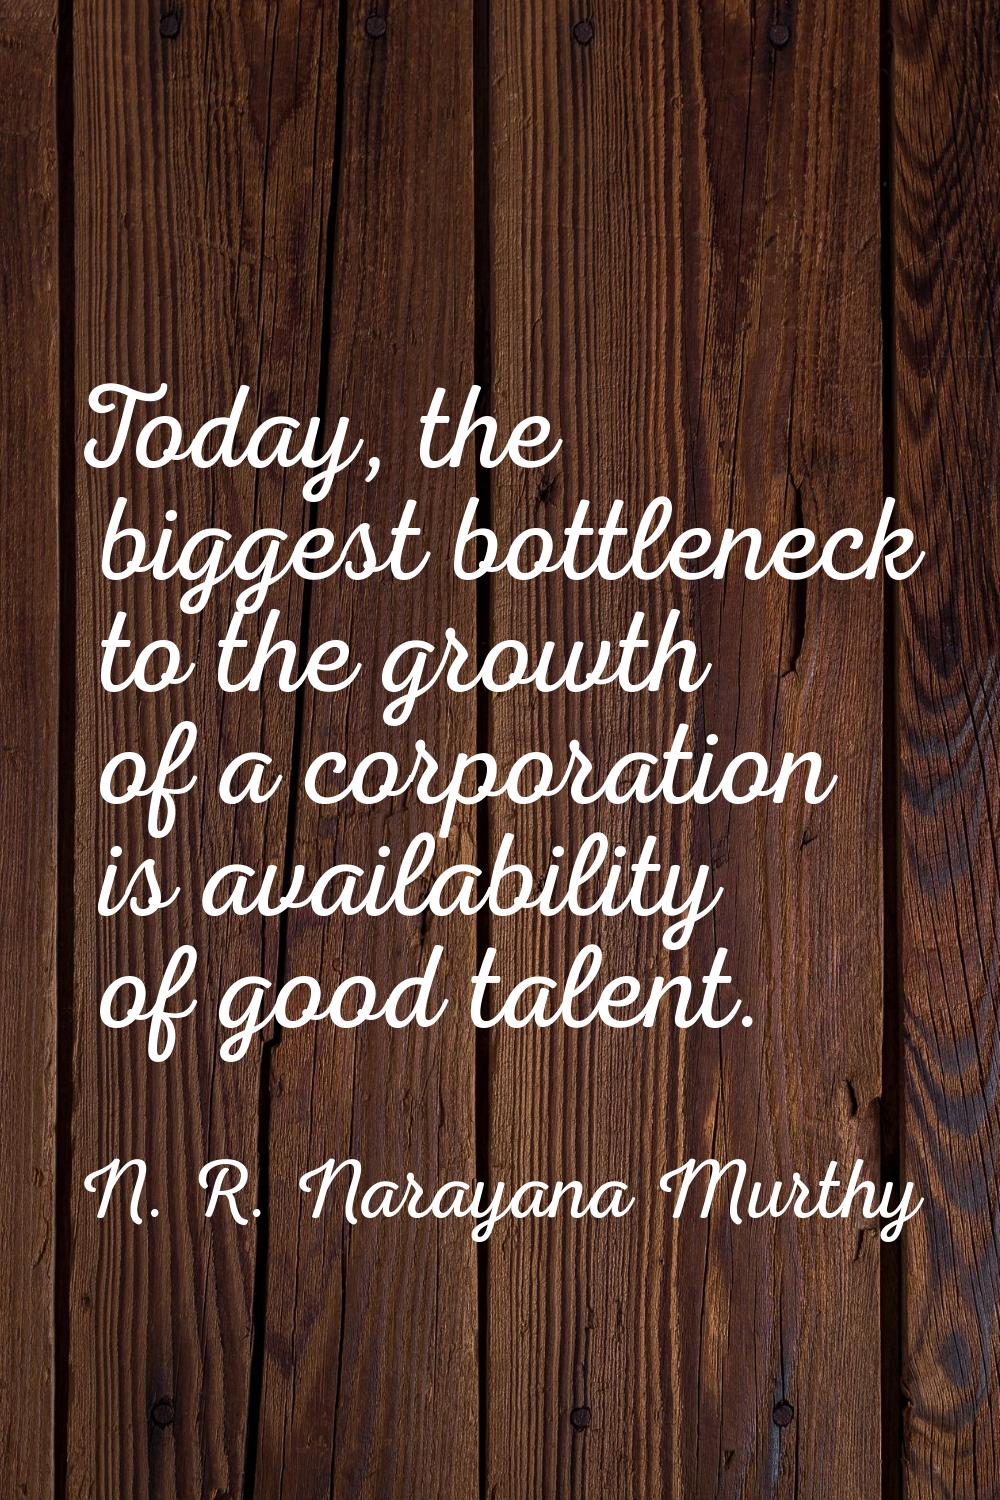 Today, the biggest bottleneck to the growth of a corporation is availability of good talent.